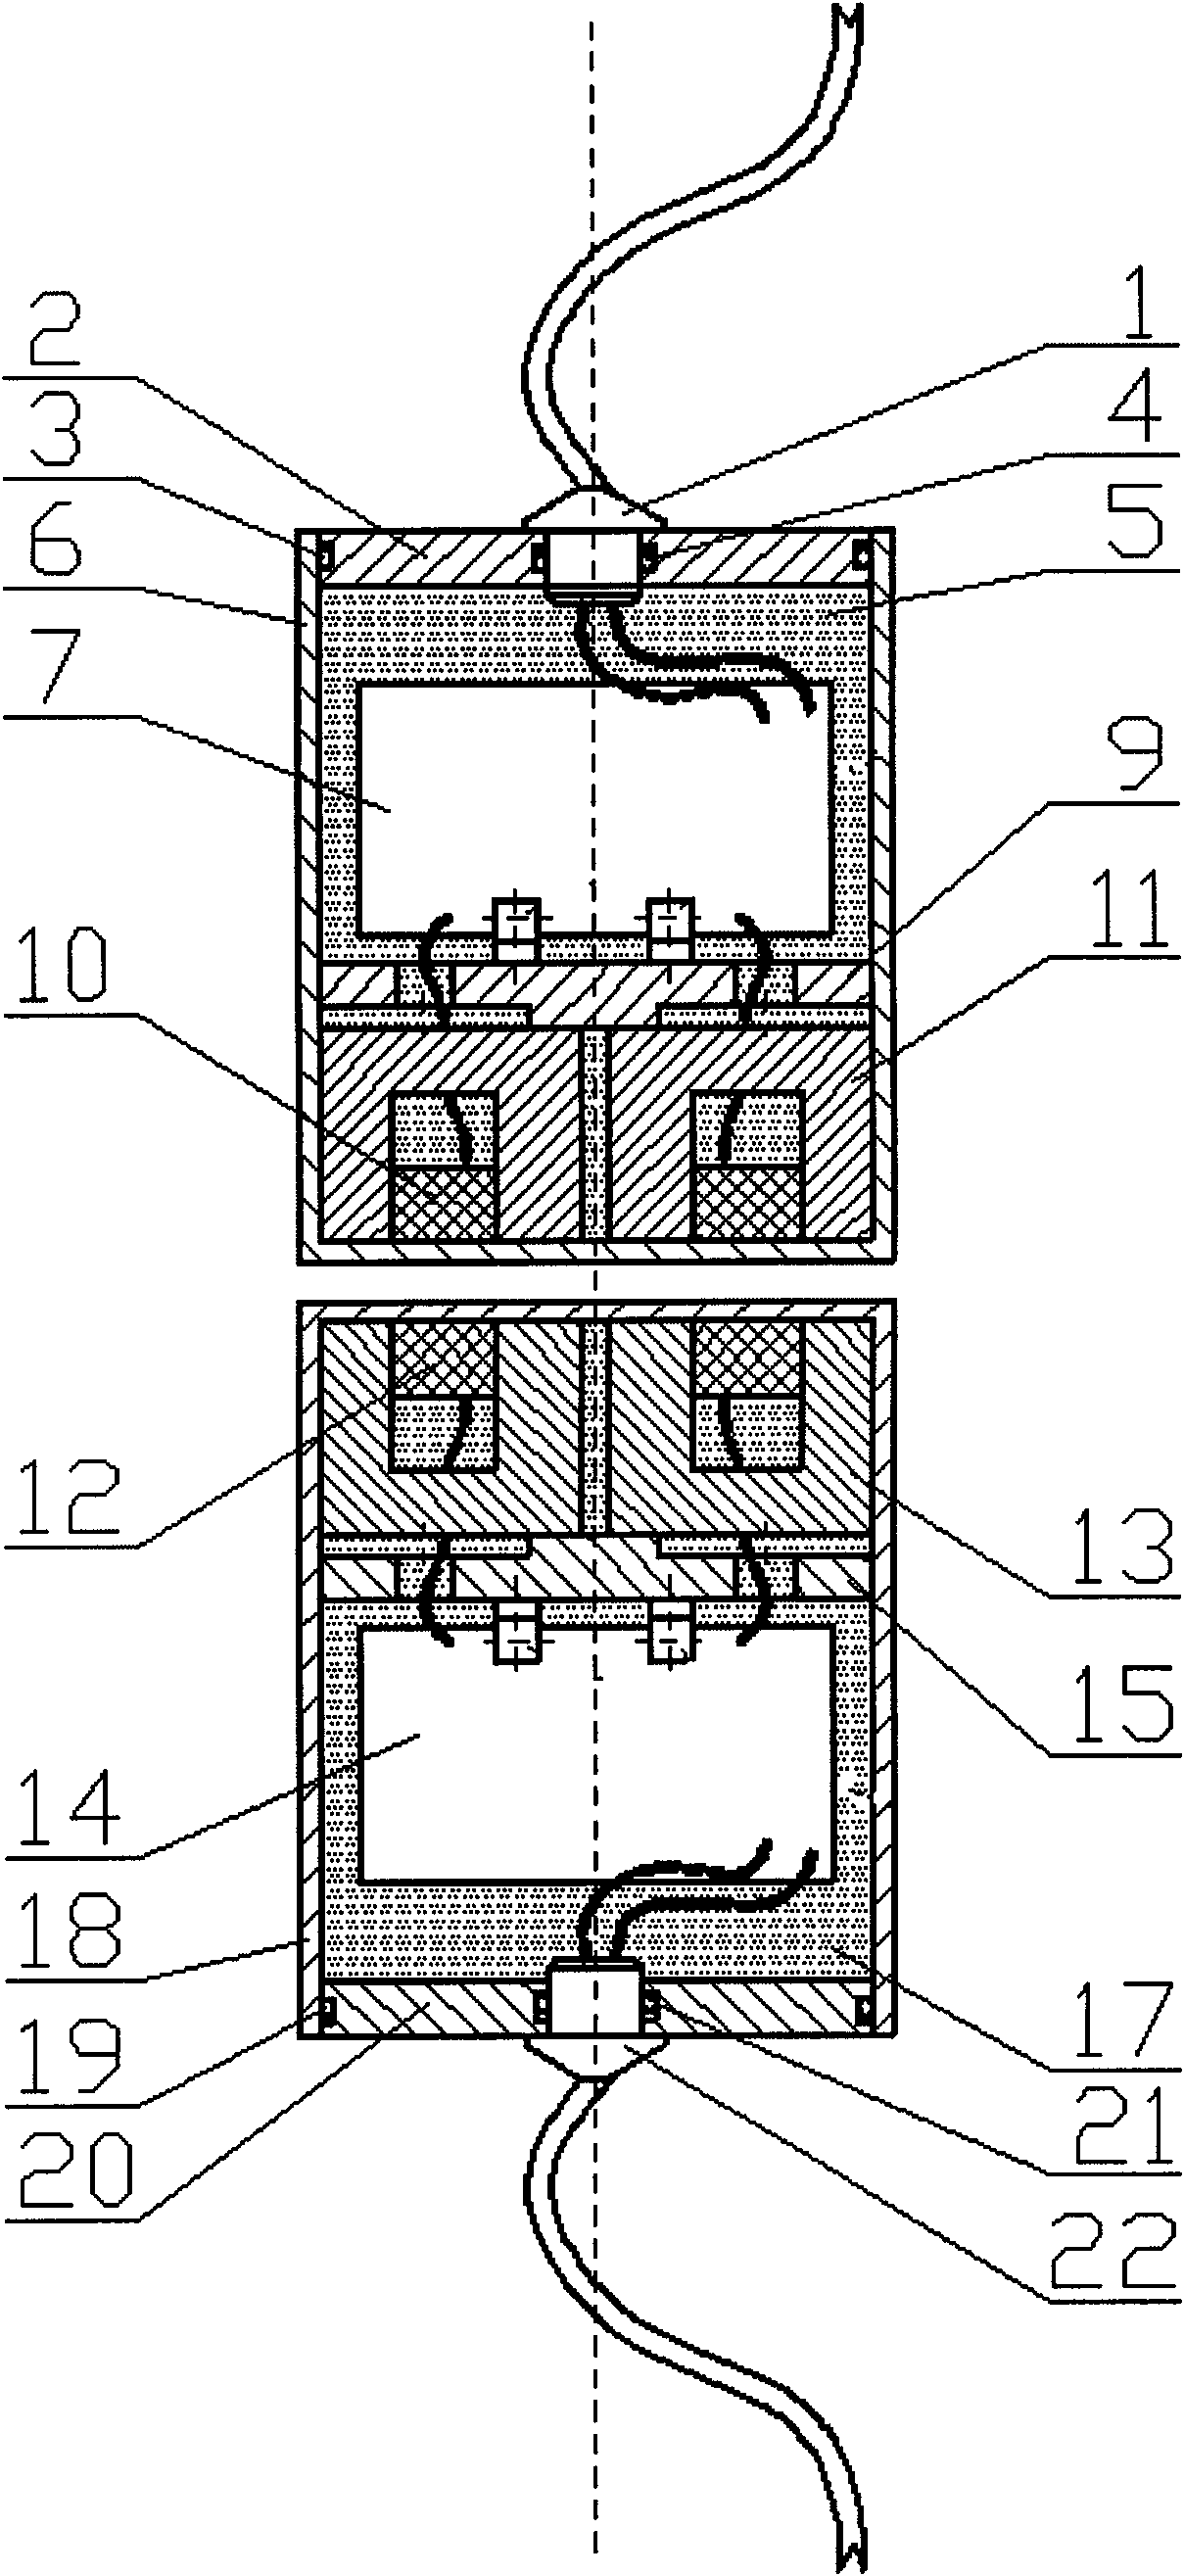 Non-contact connecting device for transmitting underwater electric energy